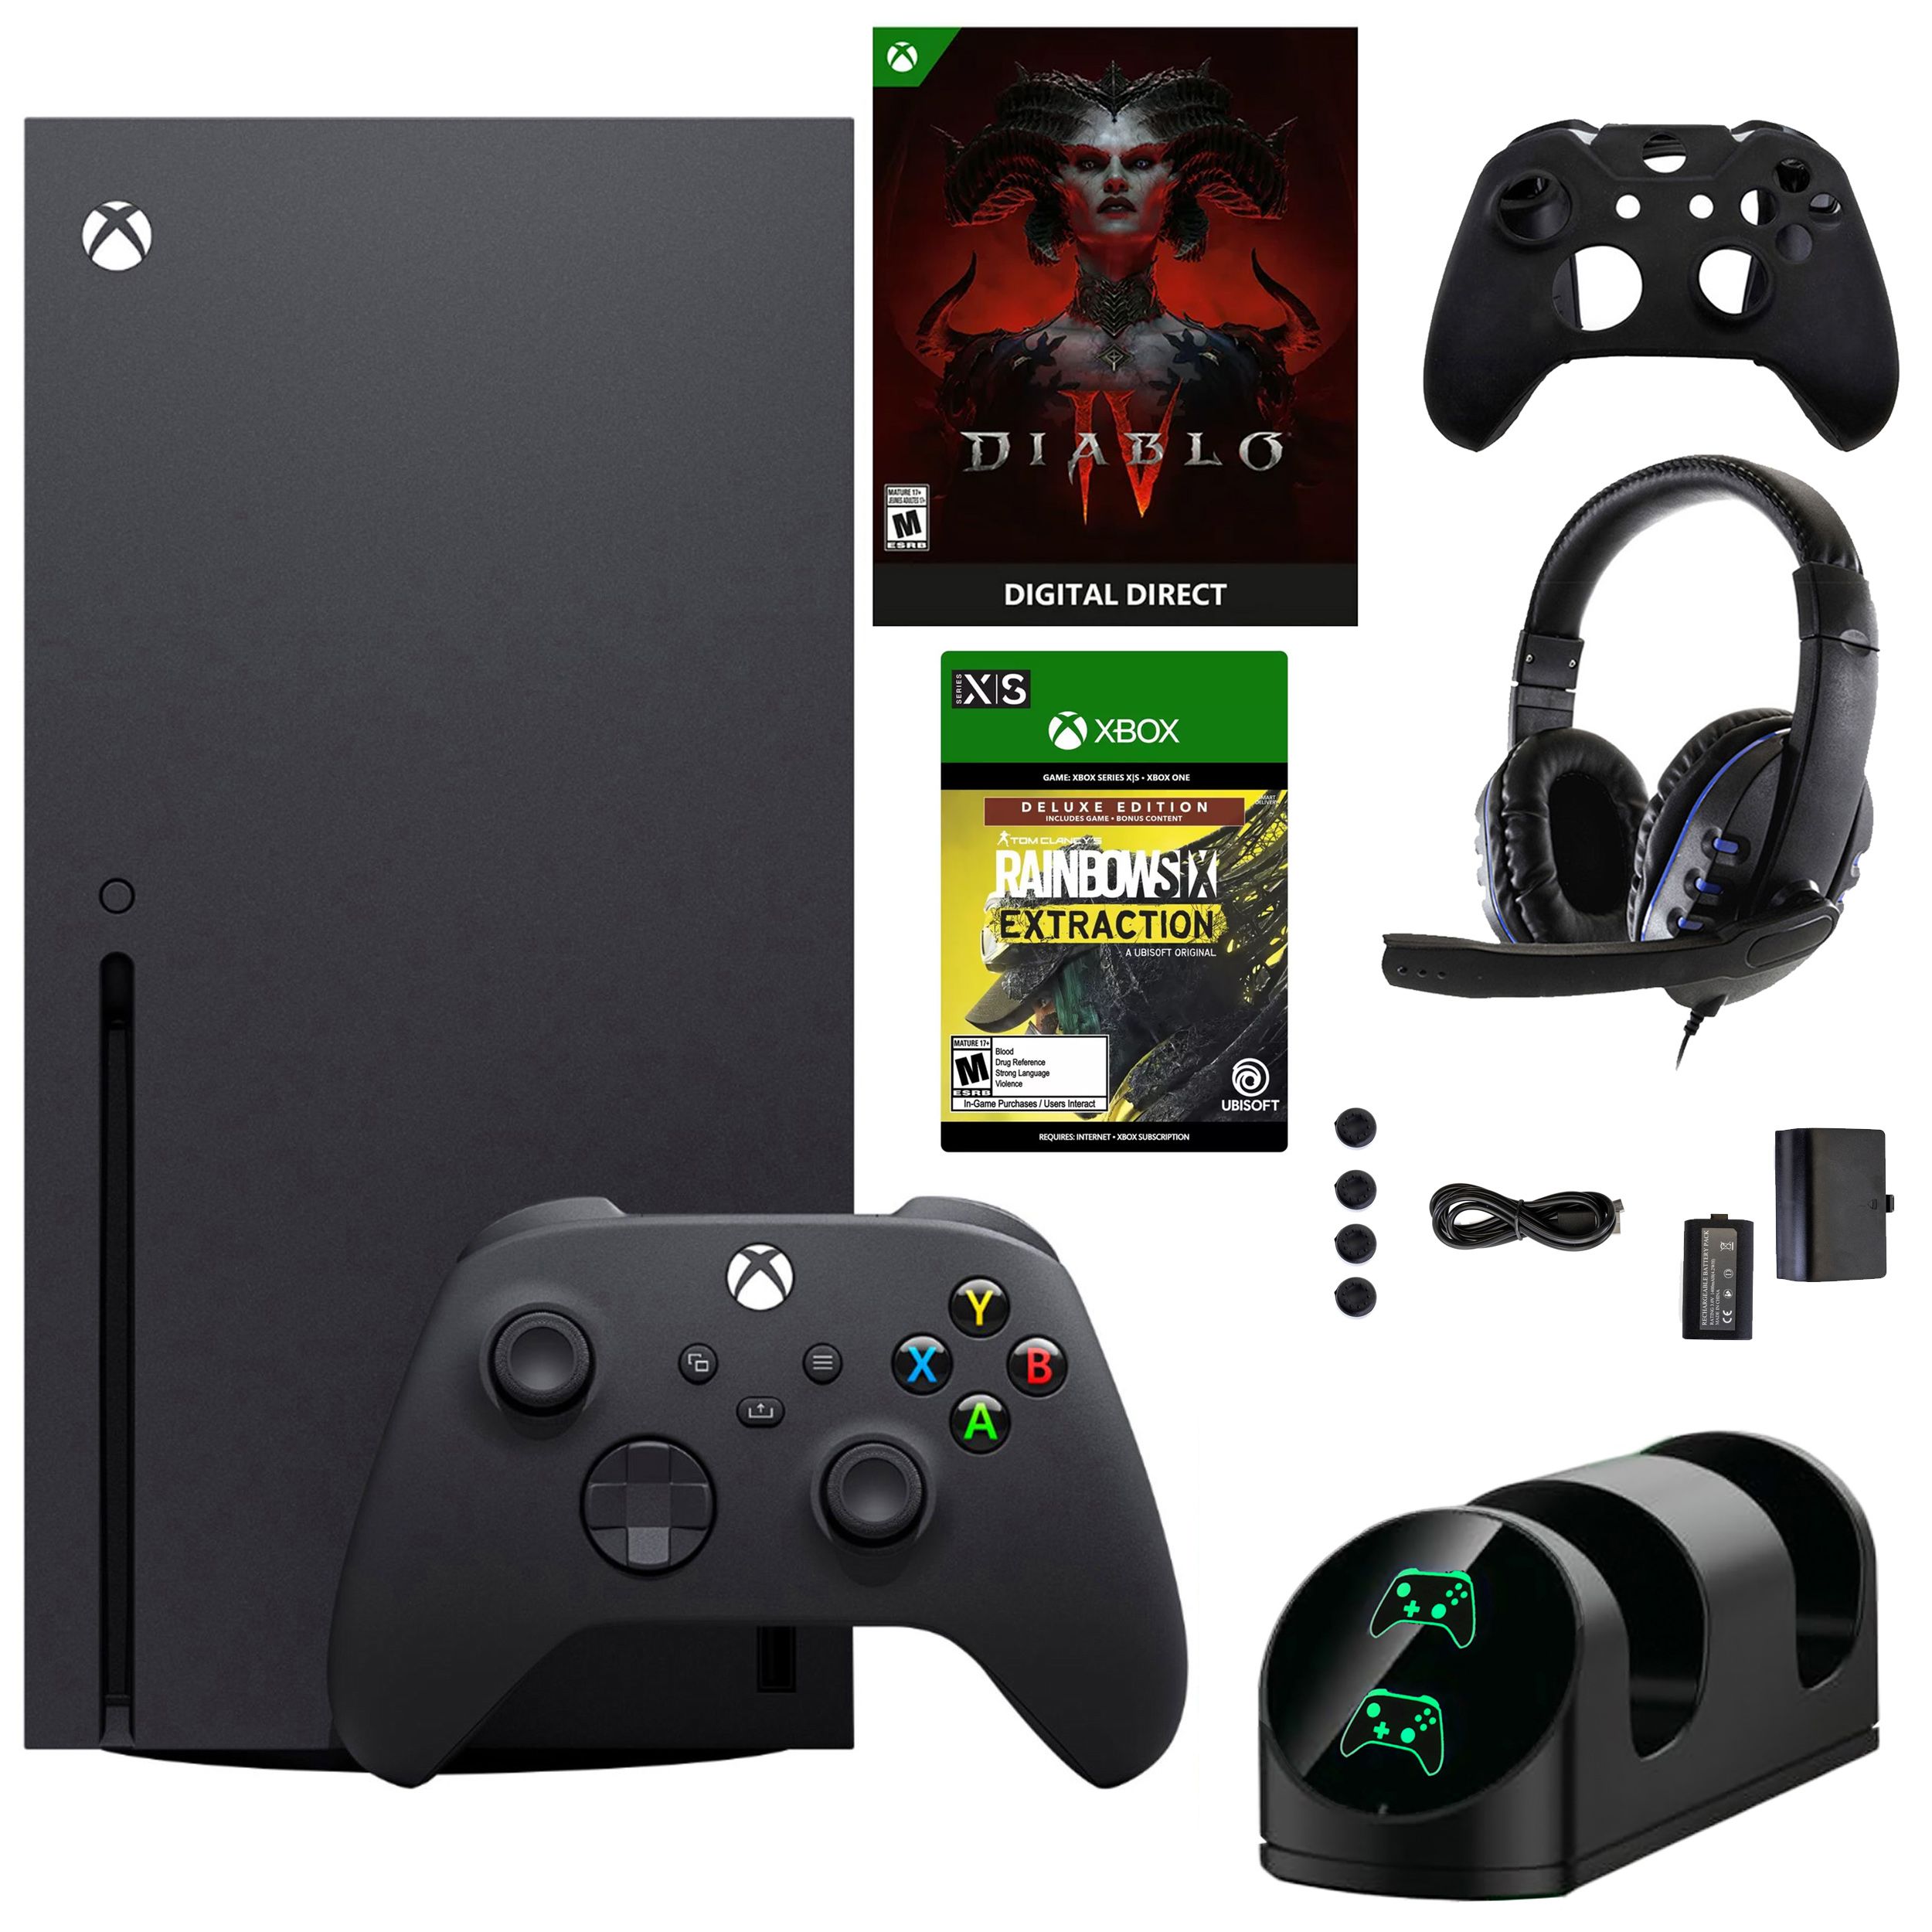 neuester Stil Fingerhut - Xbox Diablo Rainbow Kit Accessories and Series with Game Six X Console Extraction